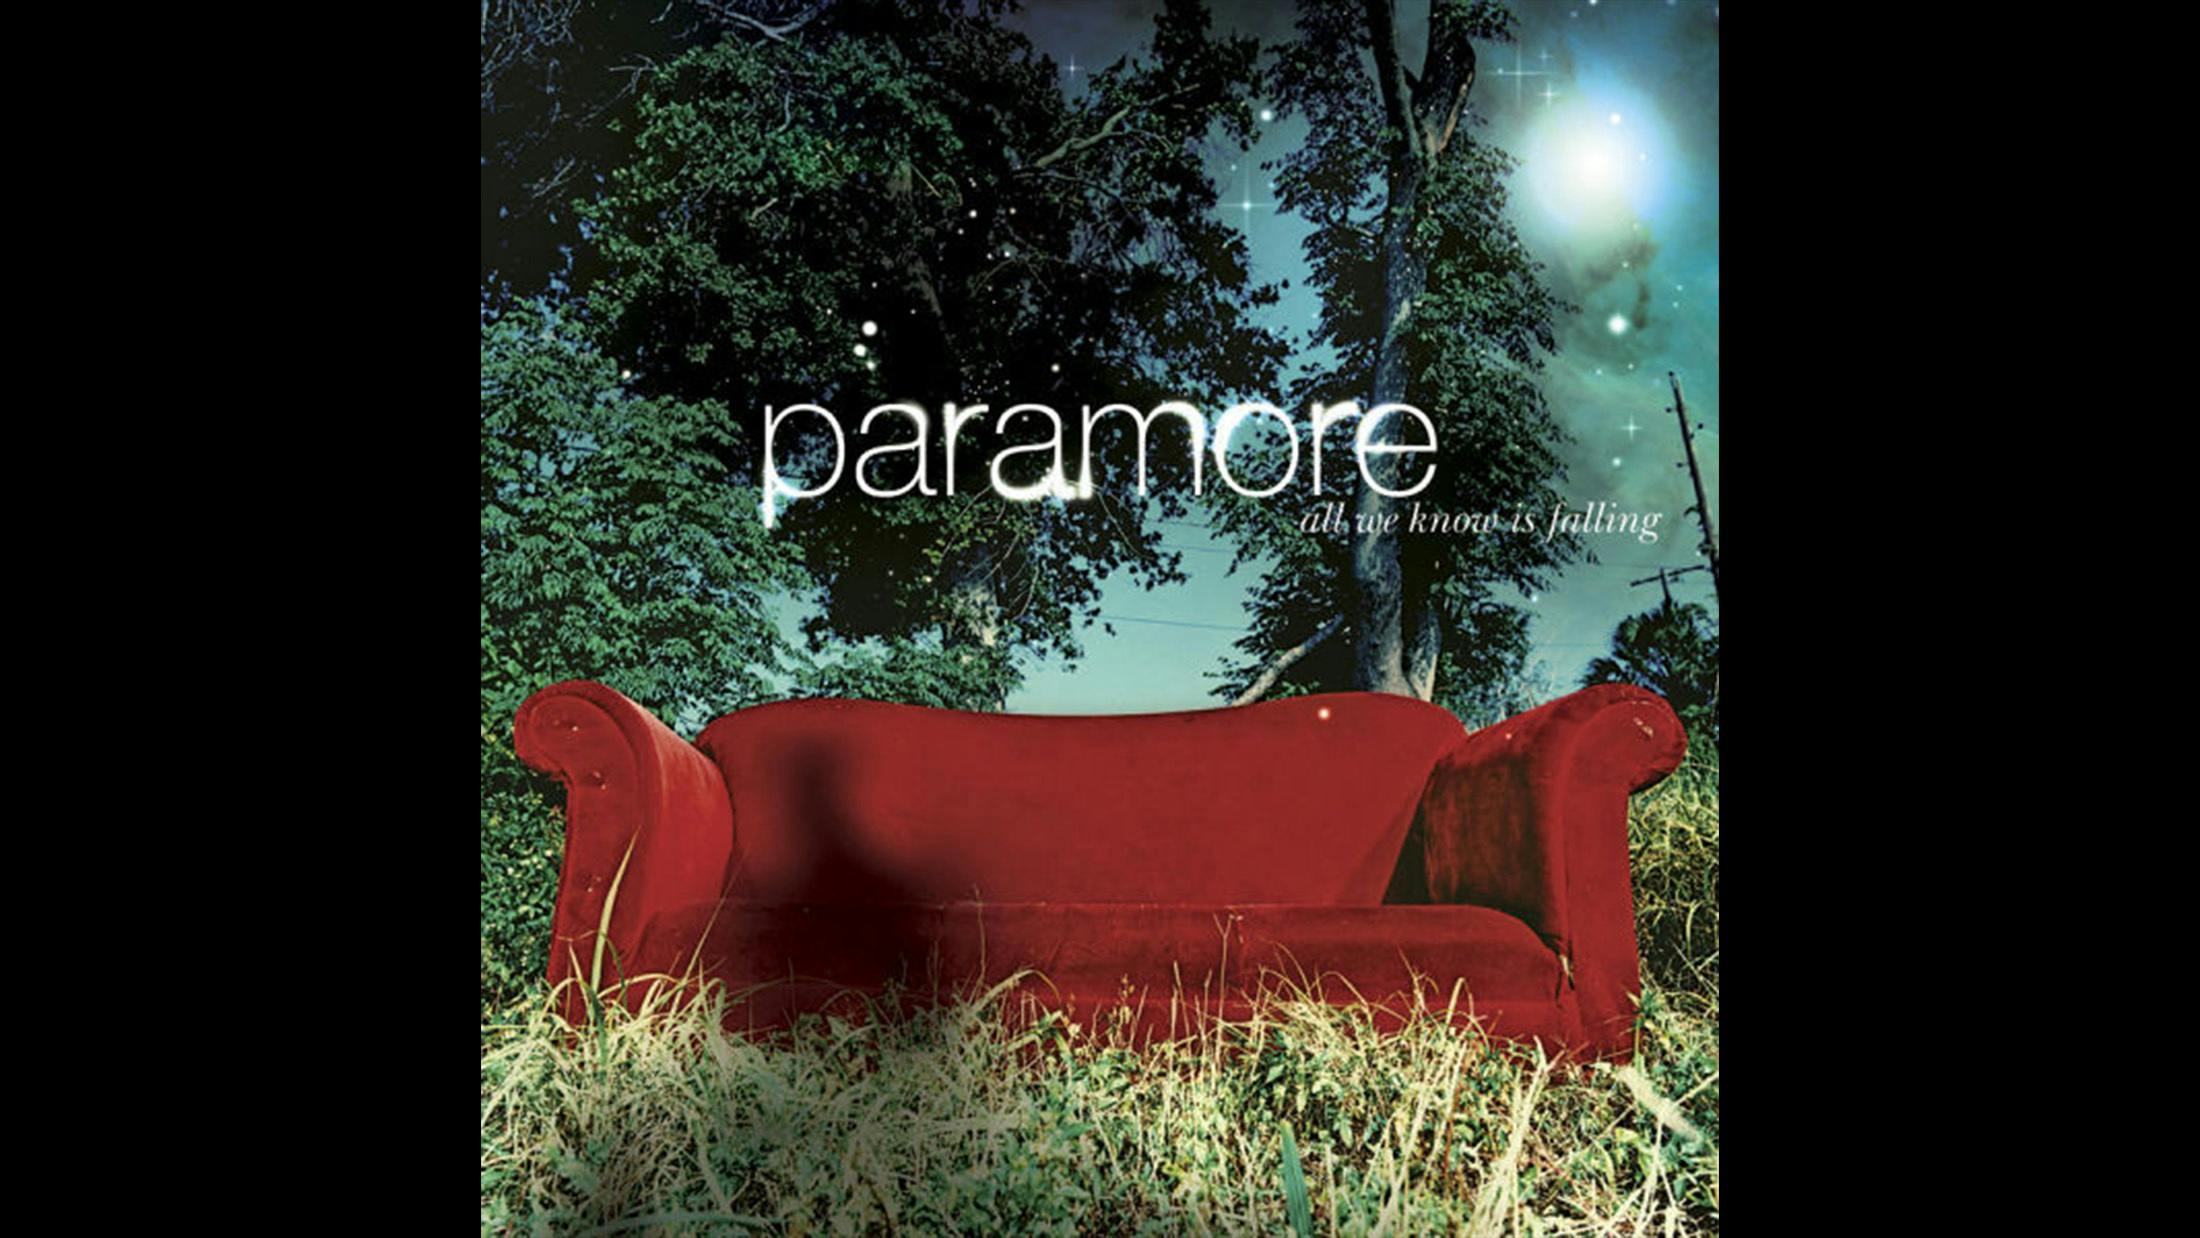 The fearless debut of a band that would change the face of pop-punk in the 10 years that have followed since its release. Arguably Paramore’s most truly punk effort to date, gaining it a nod here over 2007’s Riot!, the likes of Pressure and Emergency remain some of the finest jams in the band’s catalogue. Astonishingly impressive stuff for a bunch of small-town teenagers.